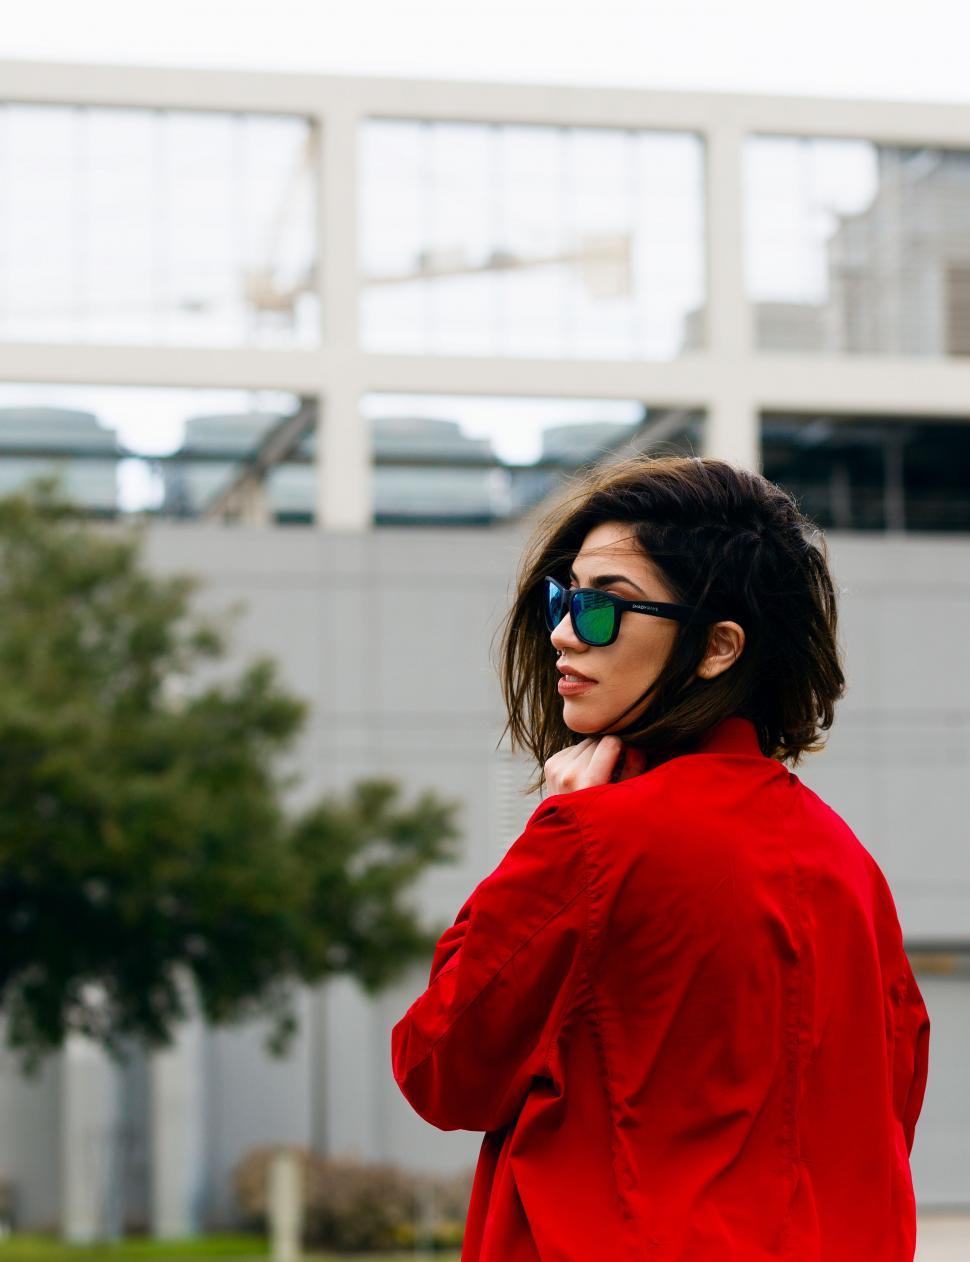 Free Image of Woman in Red Jacket and Sunglasses Talking on Cell Phone 